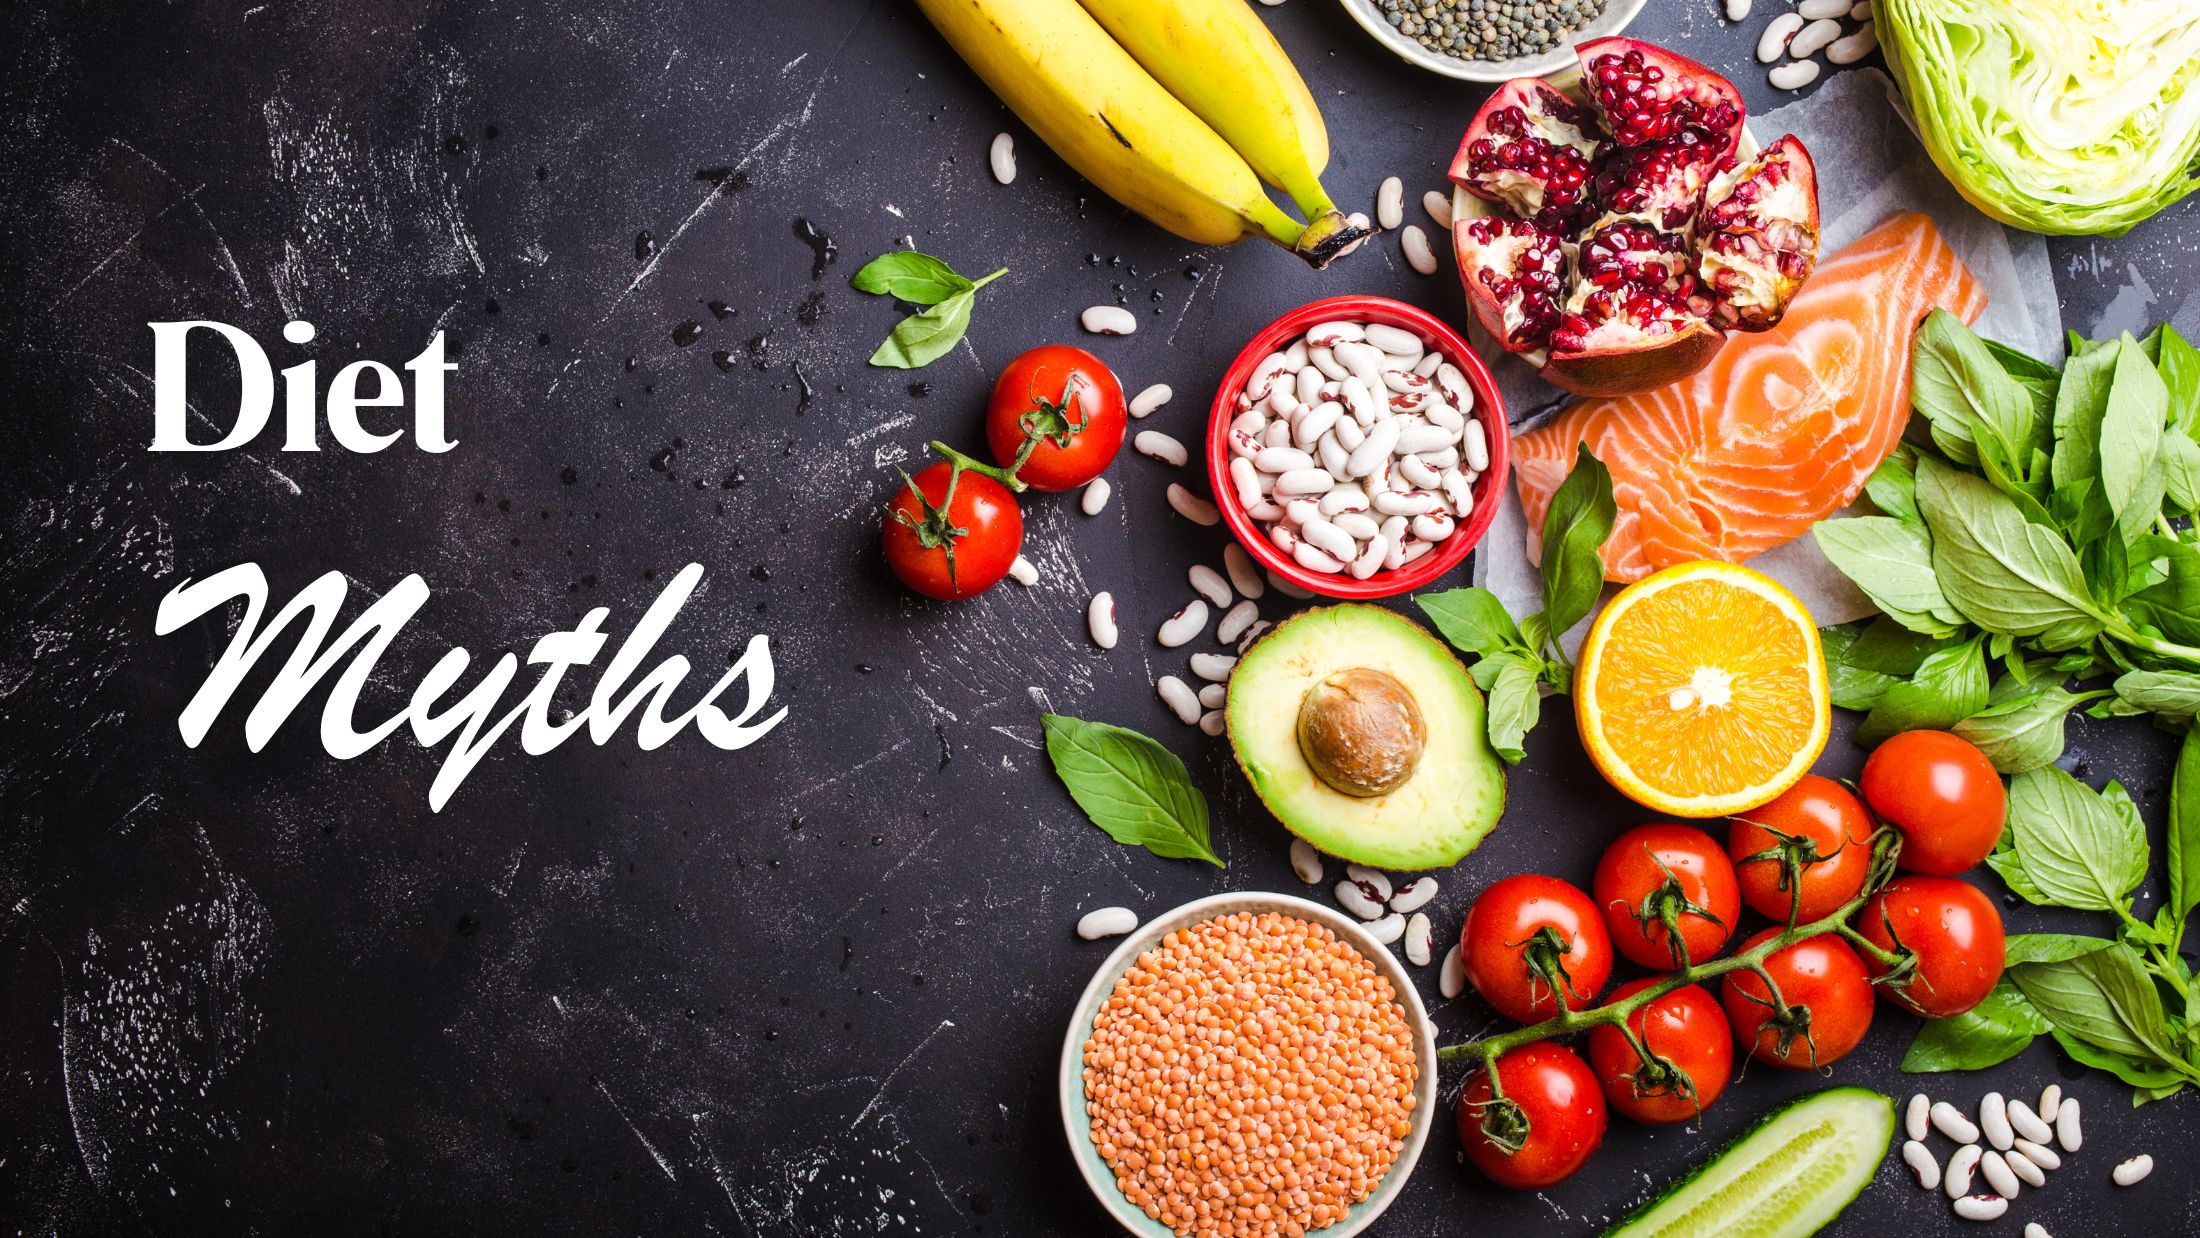 Diet Myths: The Truth About Weight Loss, Carbs & Fats!